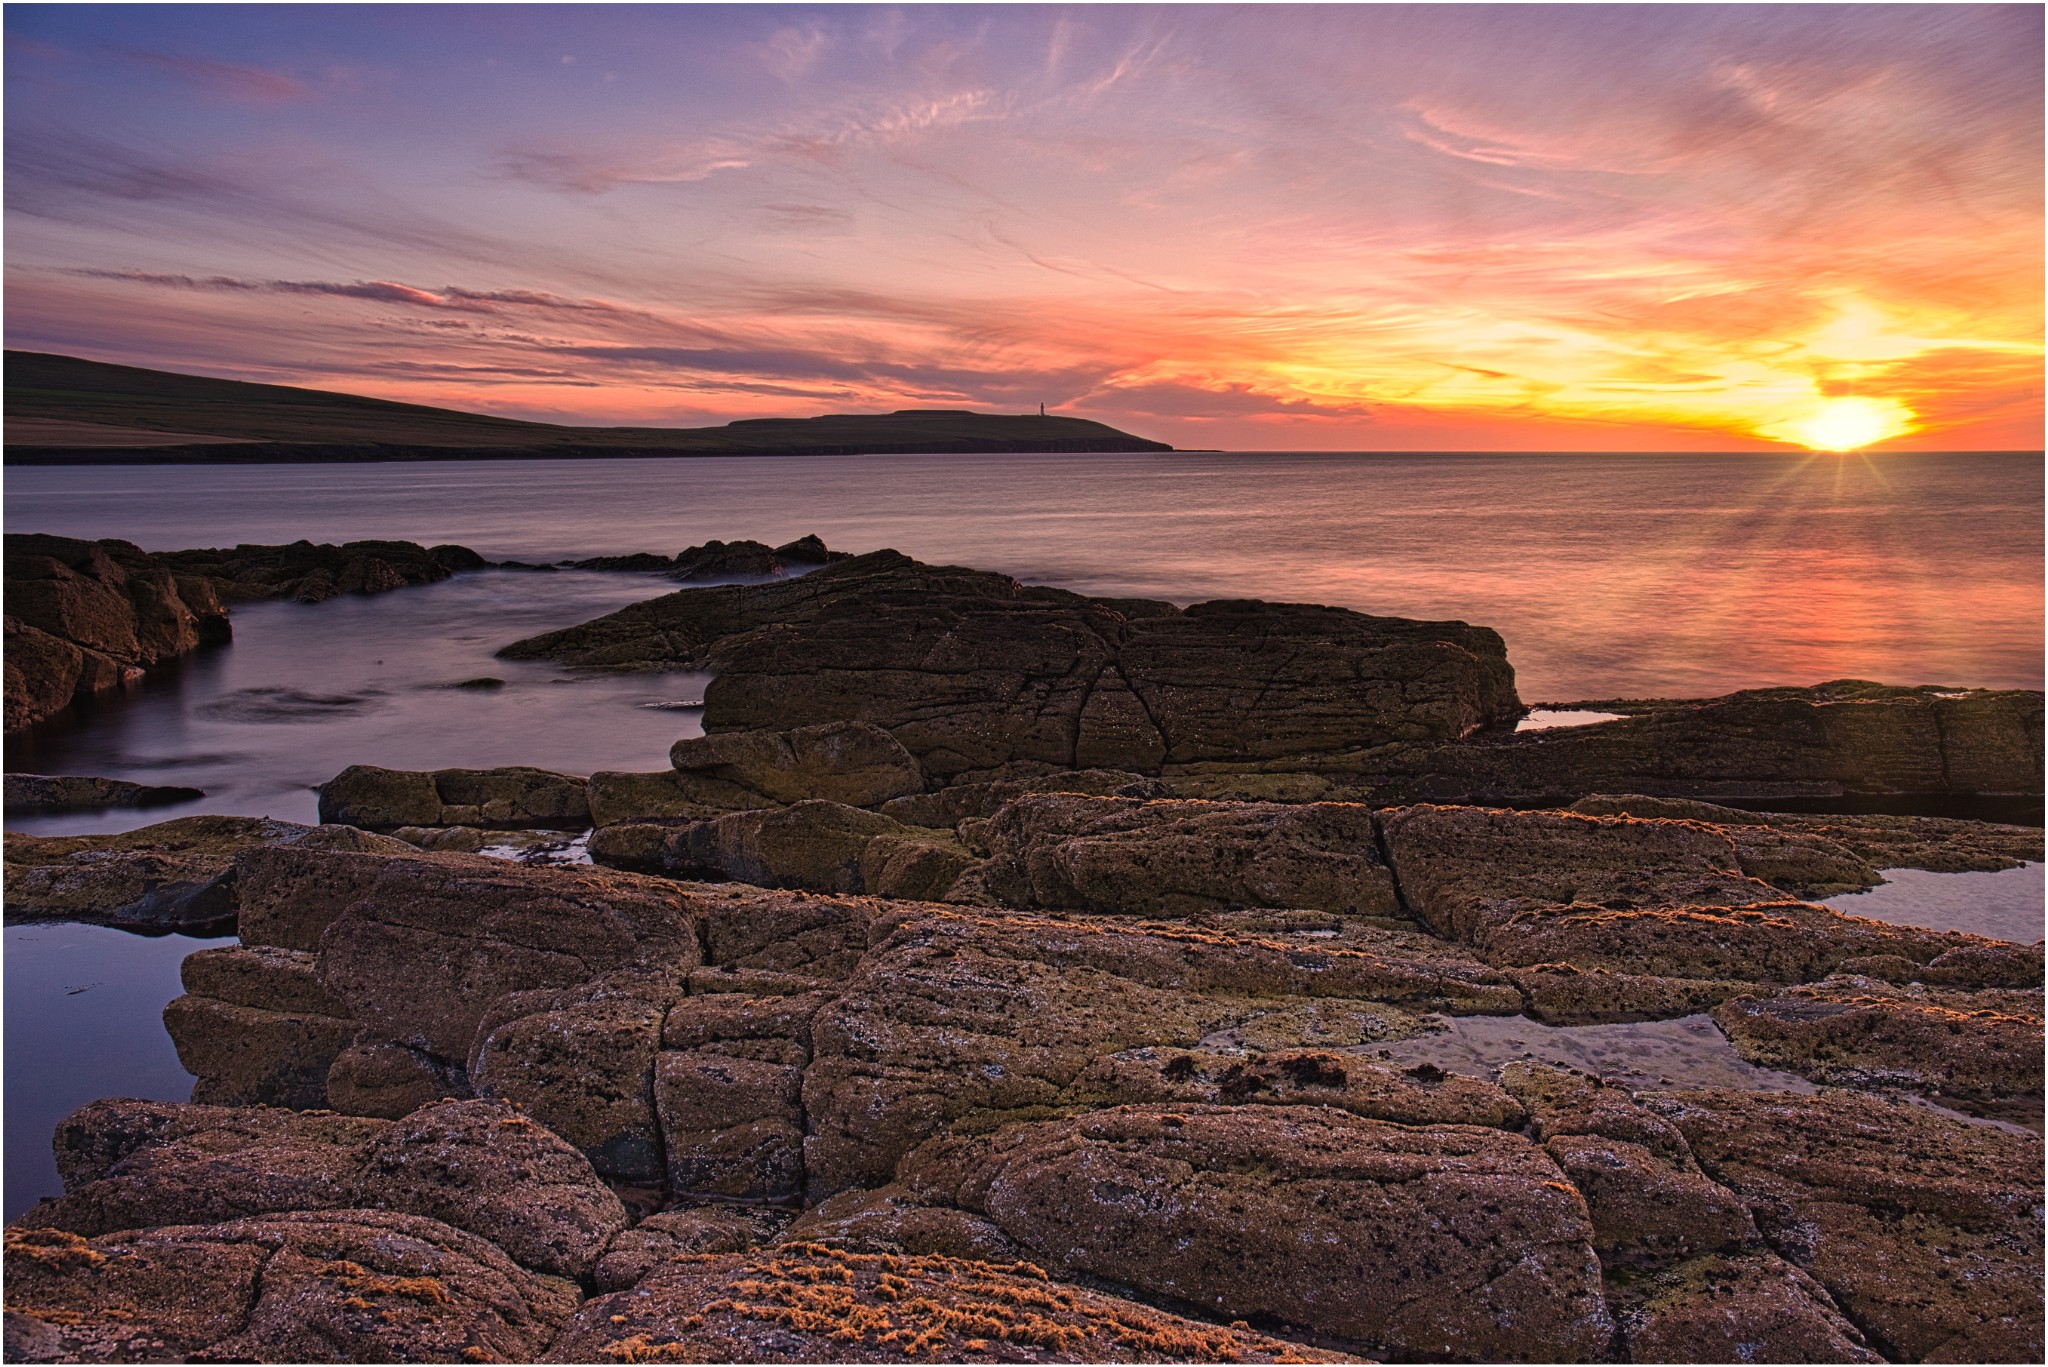 Bay of Noup, Westray - image by Robbie Rendall